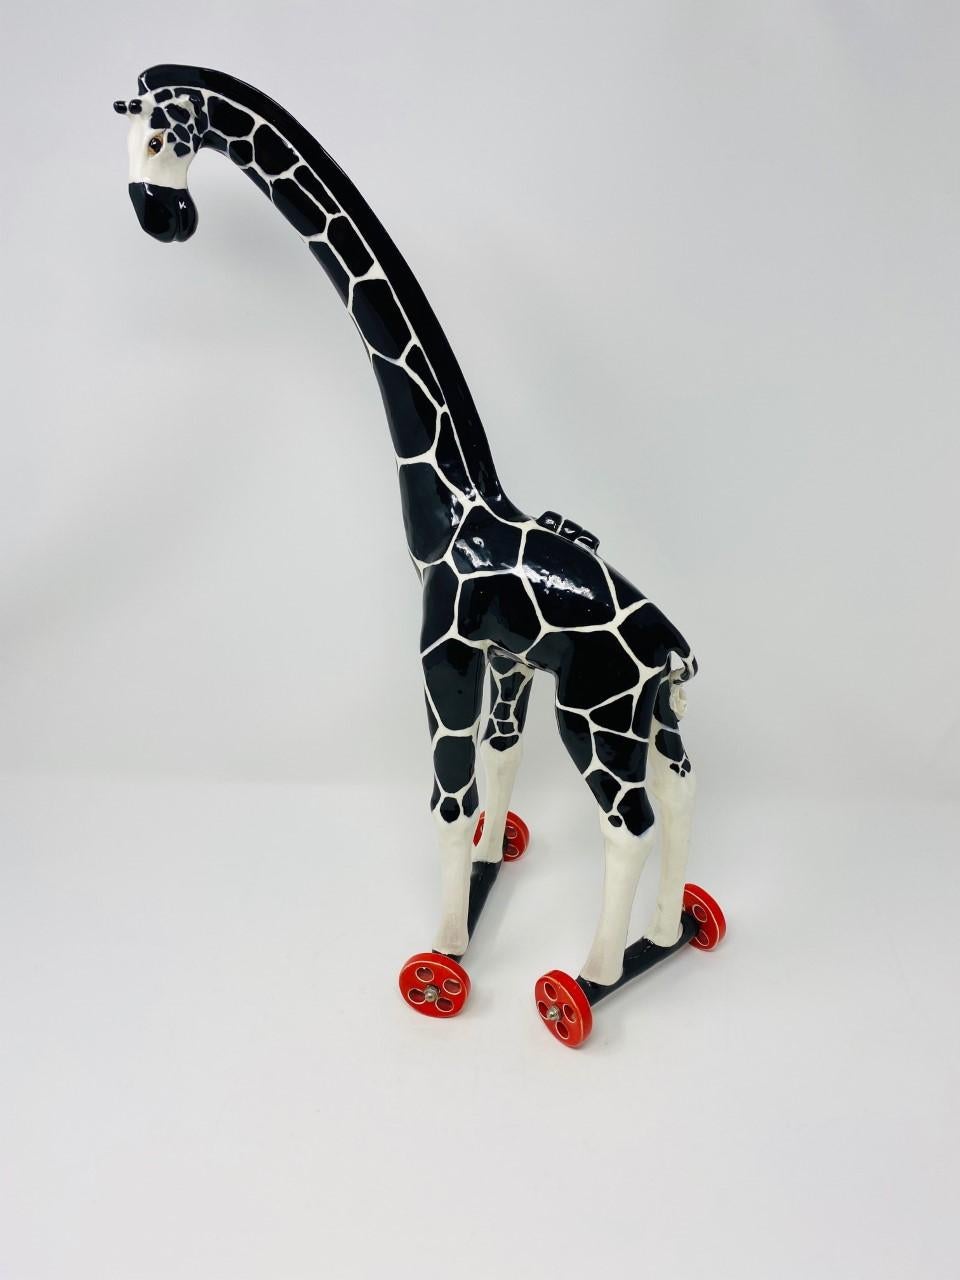 Beautiful and commanding ceramic sculpture. This piece is whimsical as it is enchanting. The giraffe form is sculpted beautifully and balances over wheels that move smoothly. A secret compartment is constructed within the body of the giraffe with a